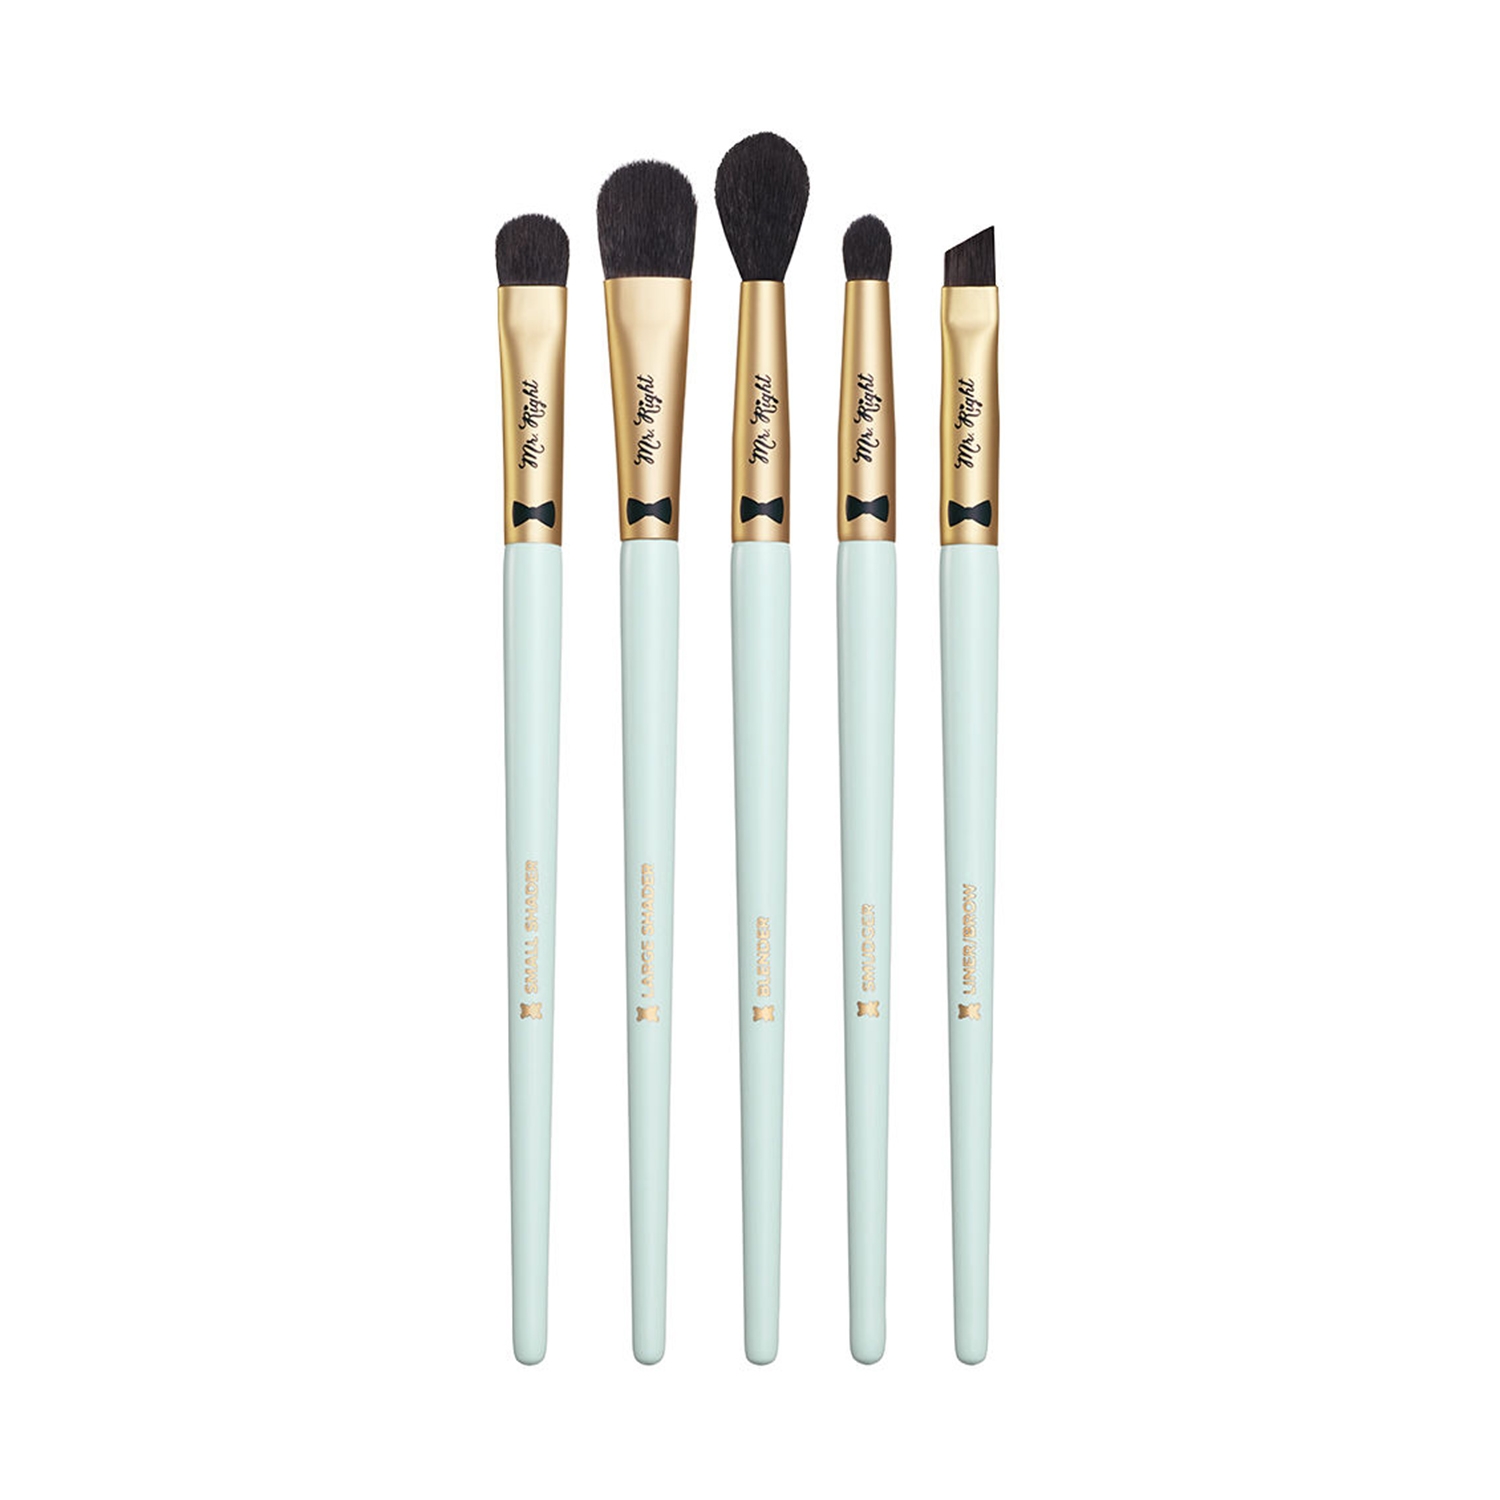 Too Faced | Too Faced Mr. Right Eye Essentials Brush Set - (5Pcs)